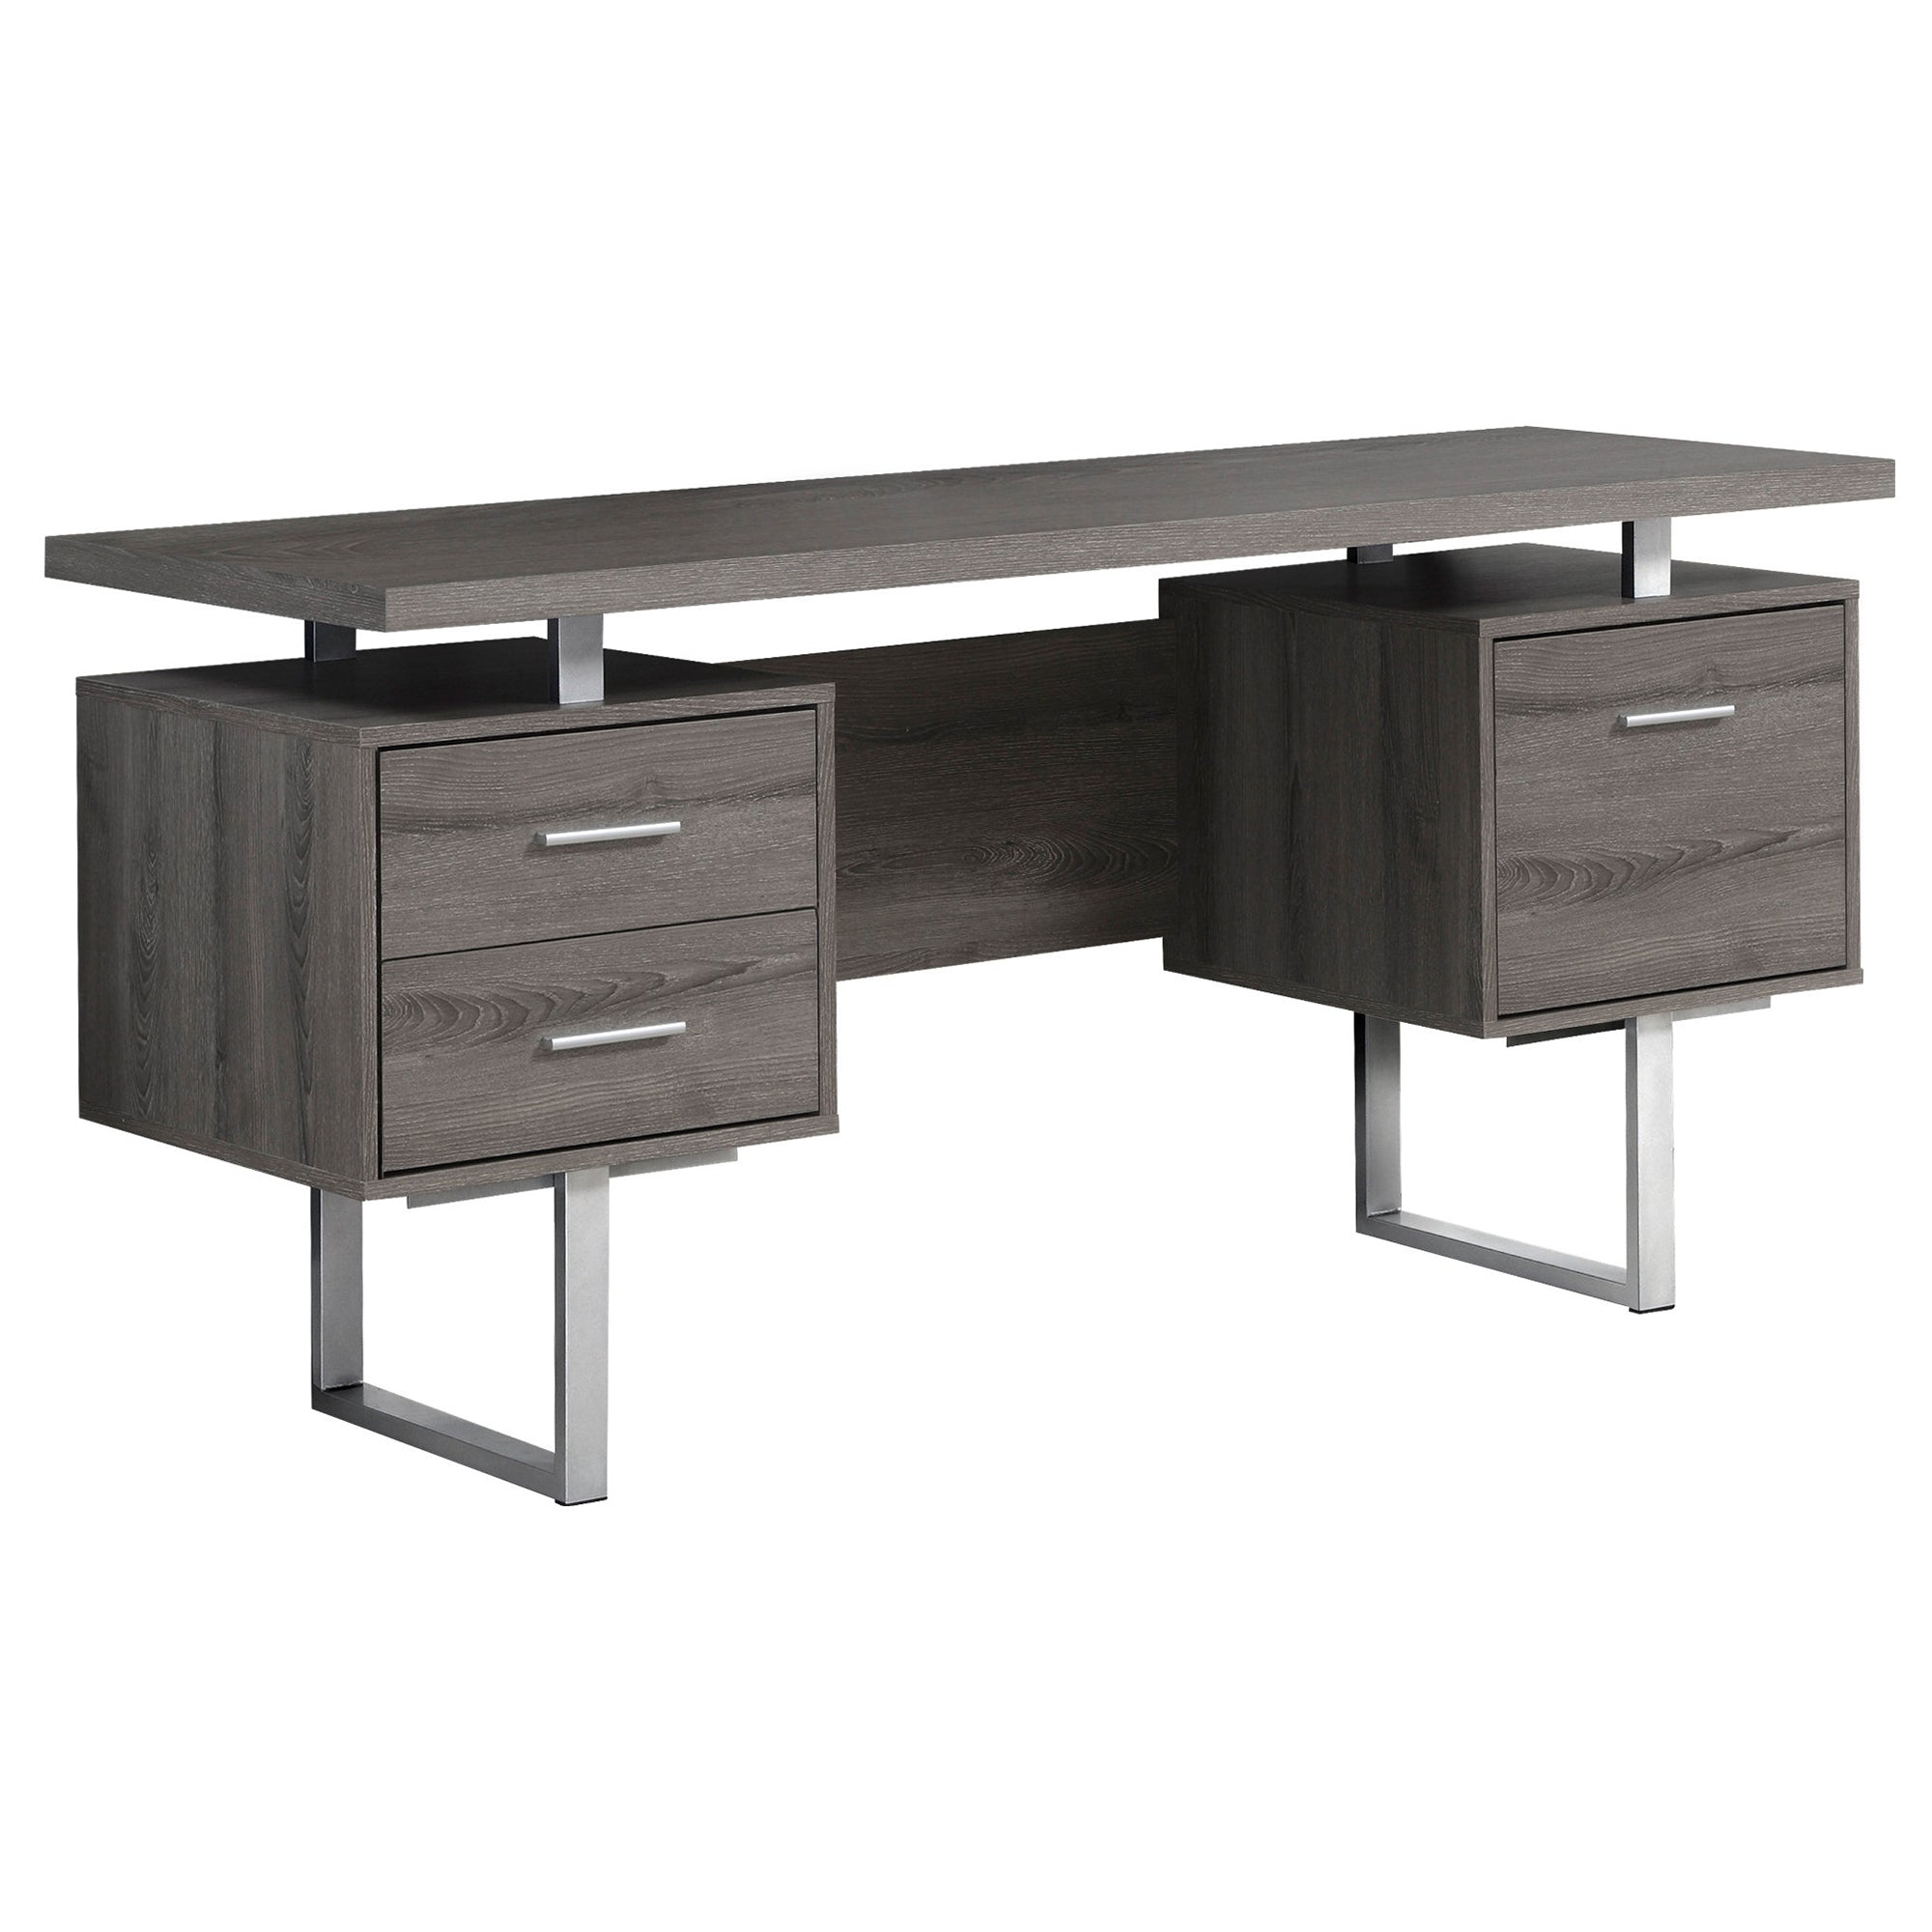 MN-957082    Computer Desk, Home Office, Laptop, Left, Right Set-Up, Storage Drawers, 60"L, Metal, Laminate, Dark Taupe, Silver, Contemporary, Modern